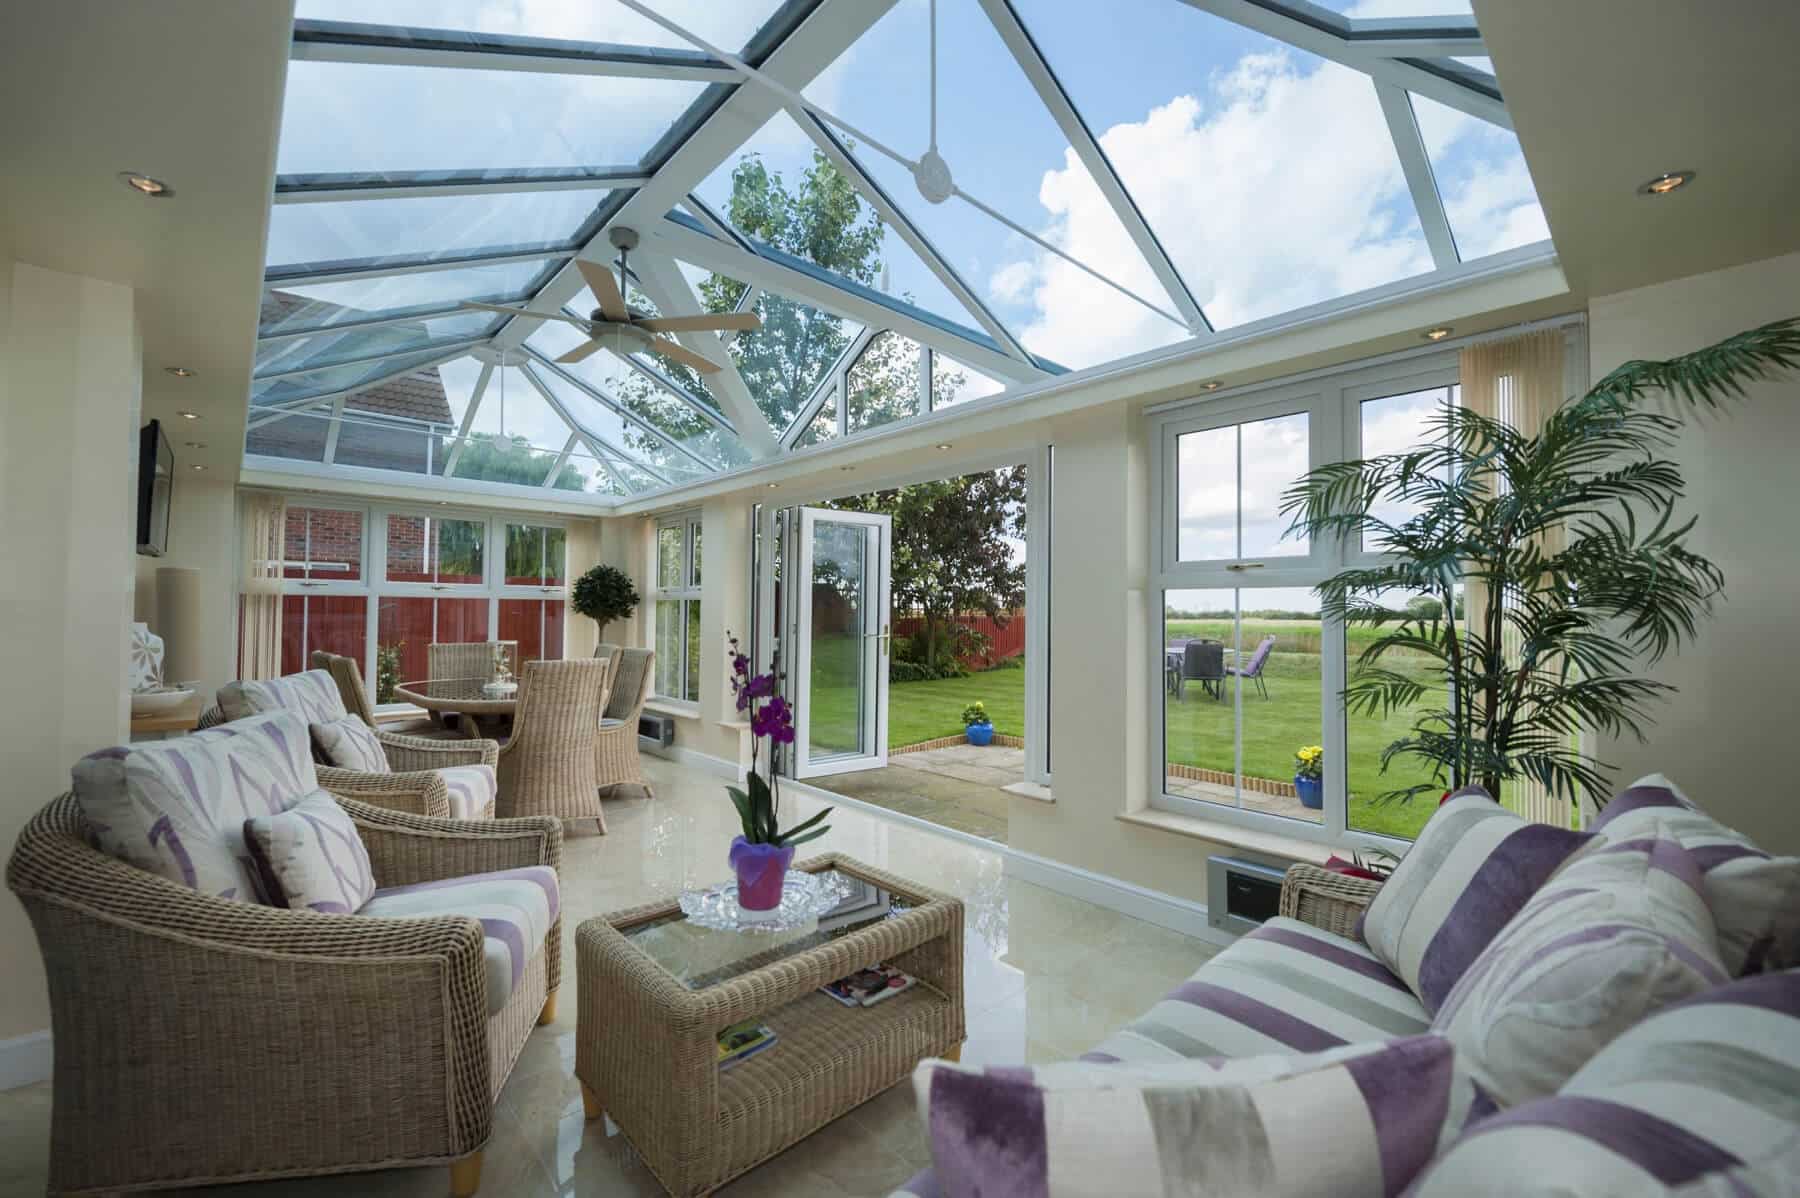 Gable end conservatories make the most of natural light